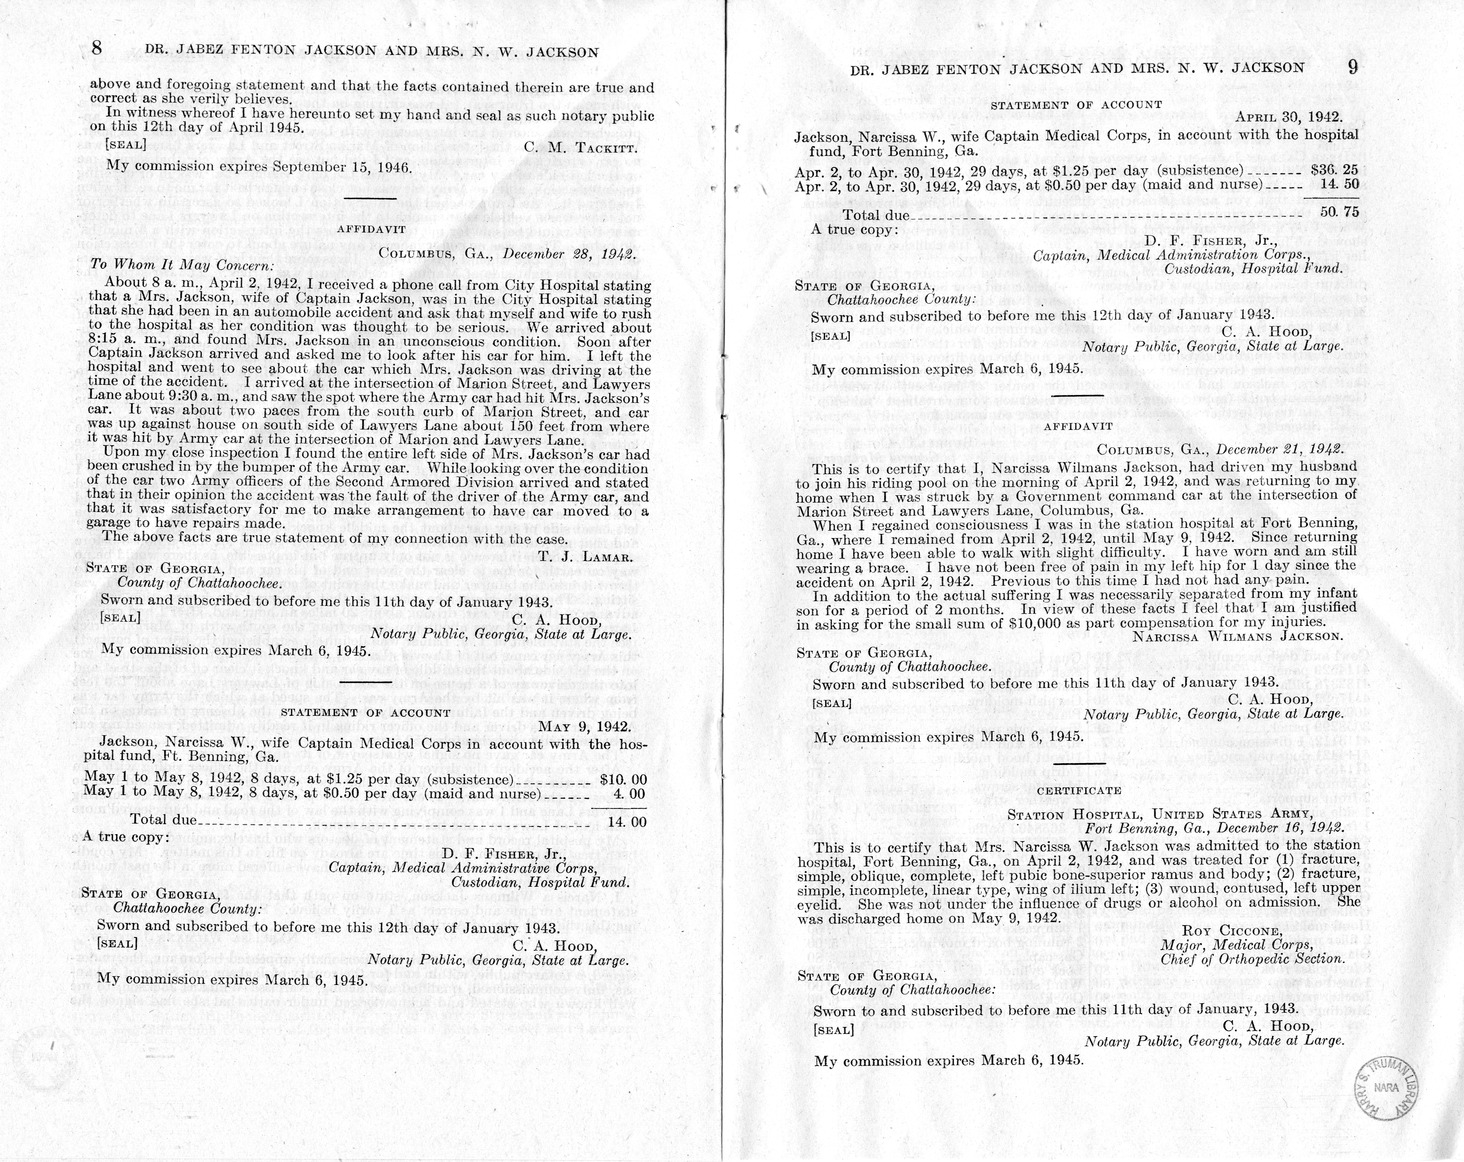 Memorandum from Harold D. Smith to M. C. Latta, H.R. 2699, For the Relief of Doctor Jabez Fenton Jackson and Mrs. Narcissa Wilmans Jackson, with Attachments